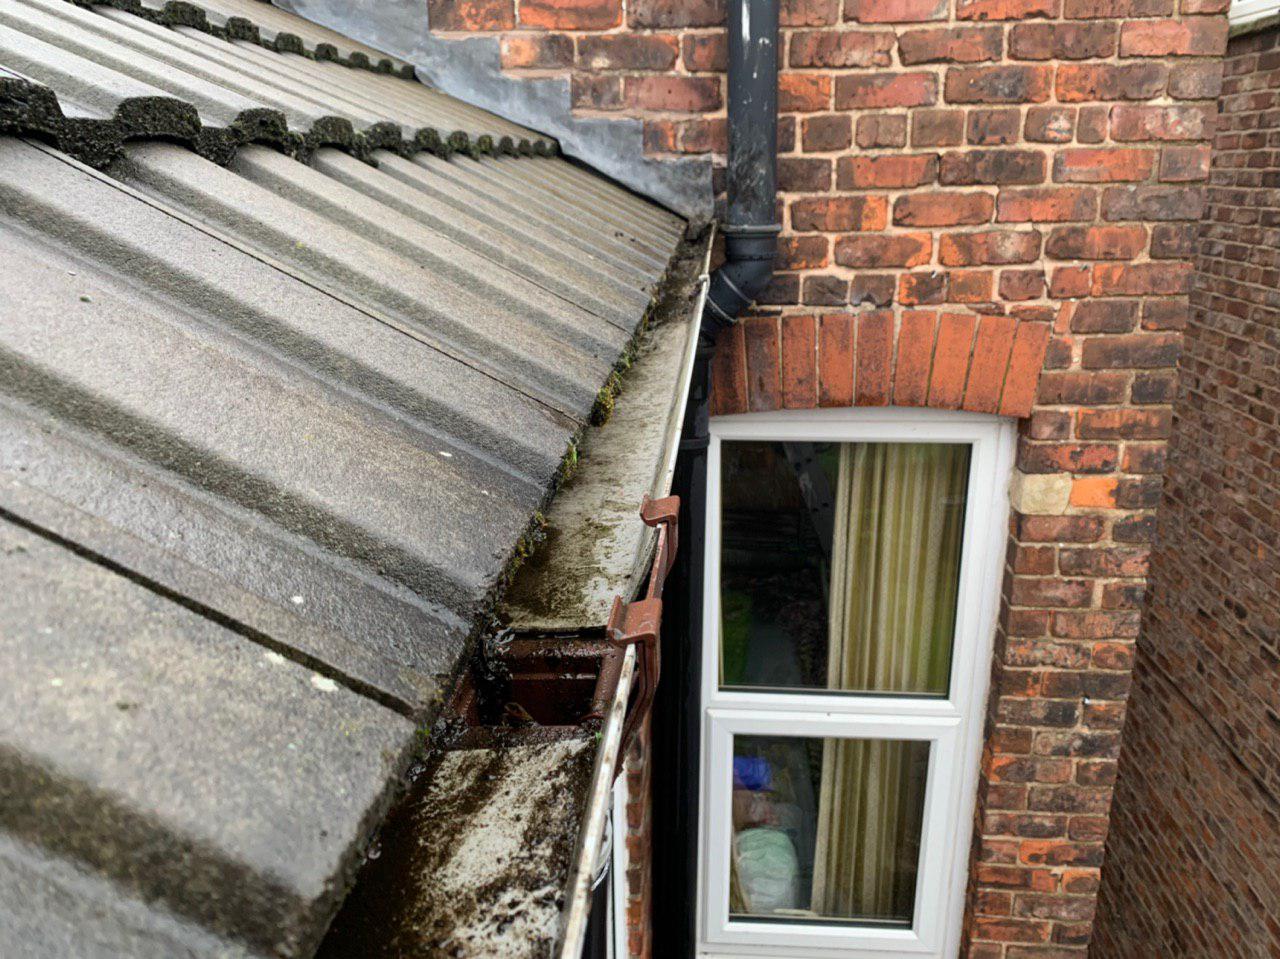 Gutters & down-pipes cleared out, we can repair or replace for new where required. Get your property ready for winter 3